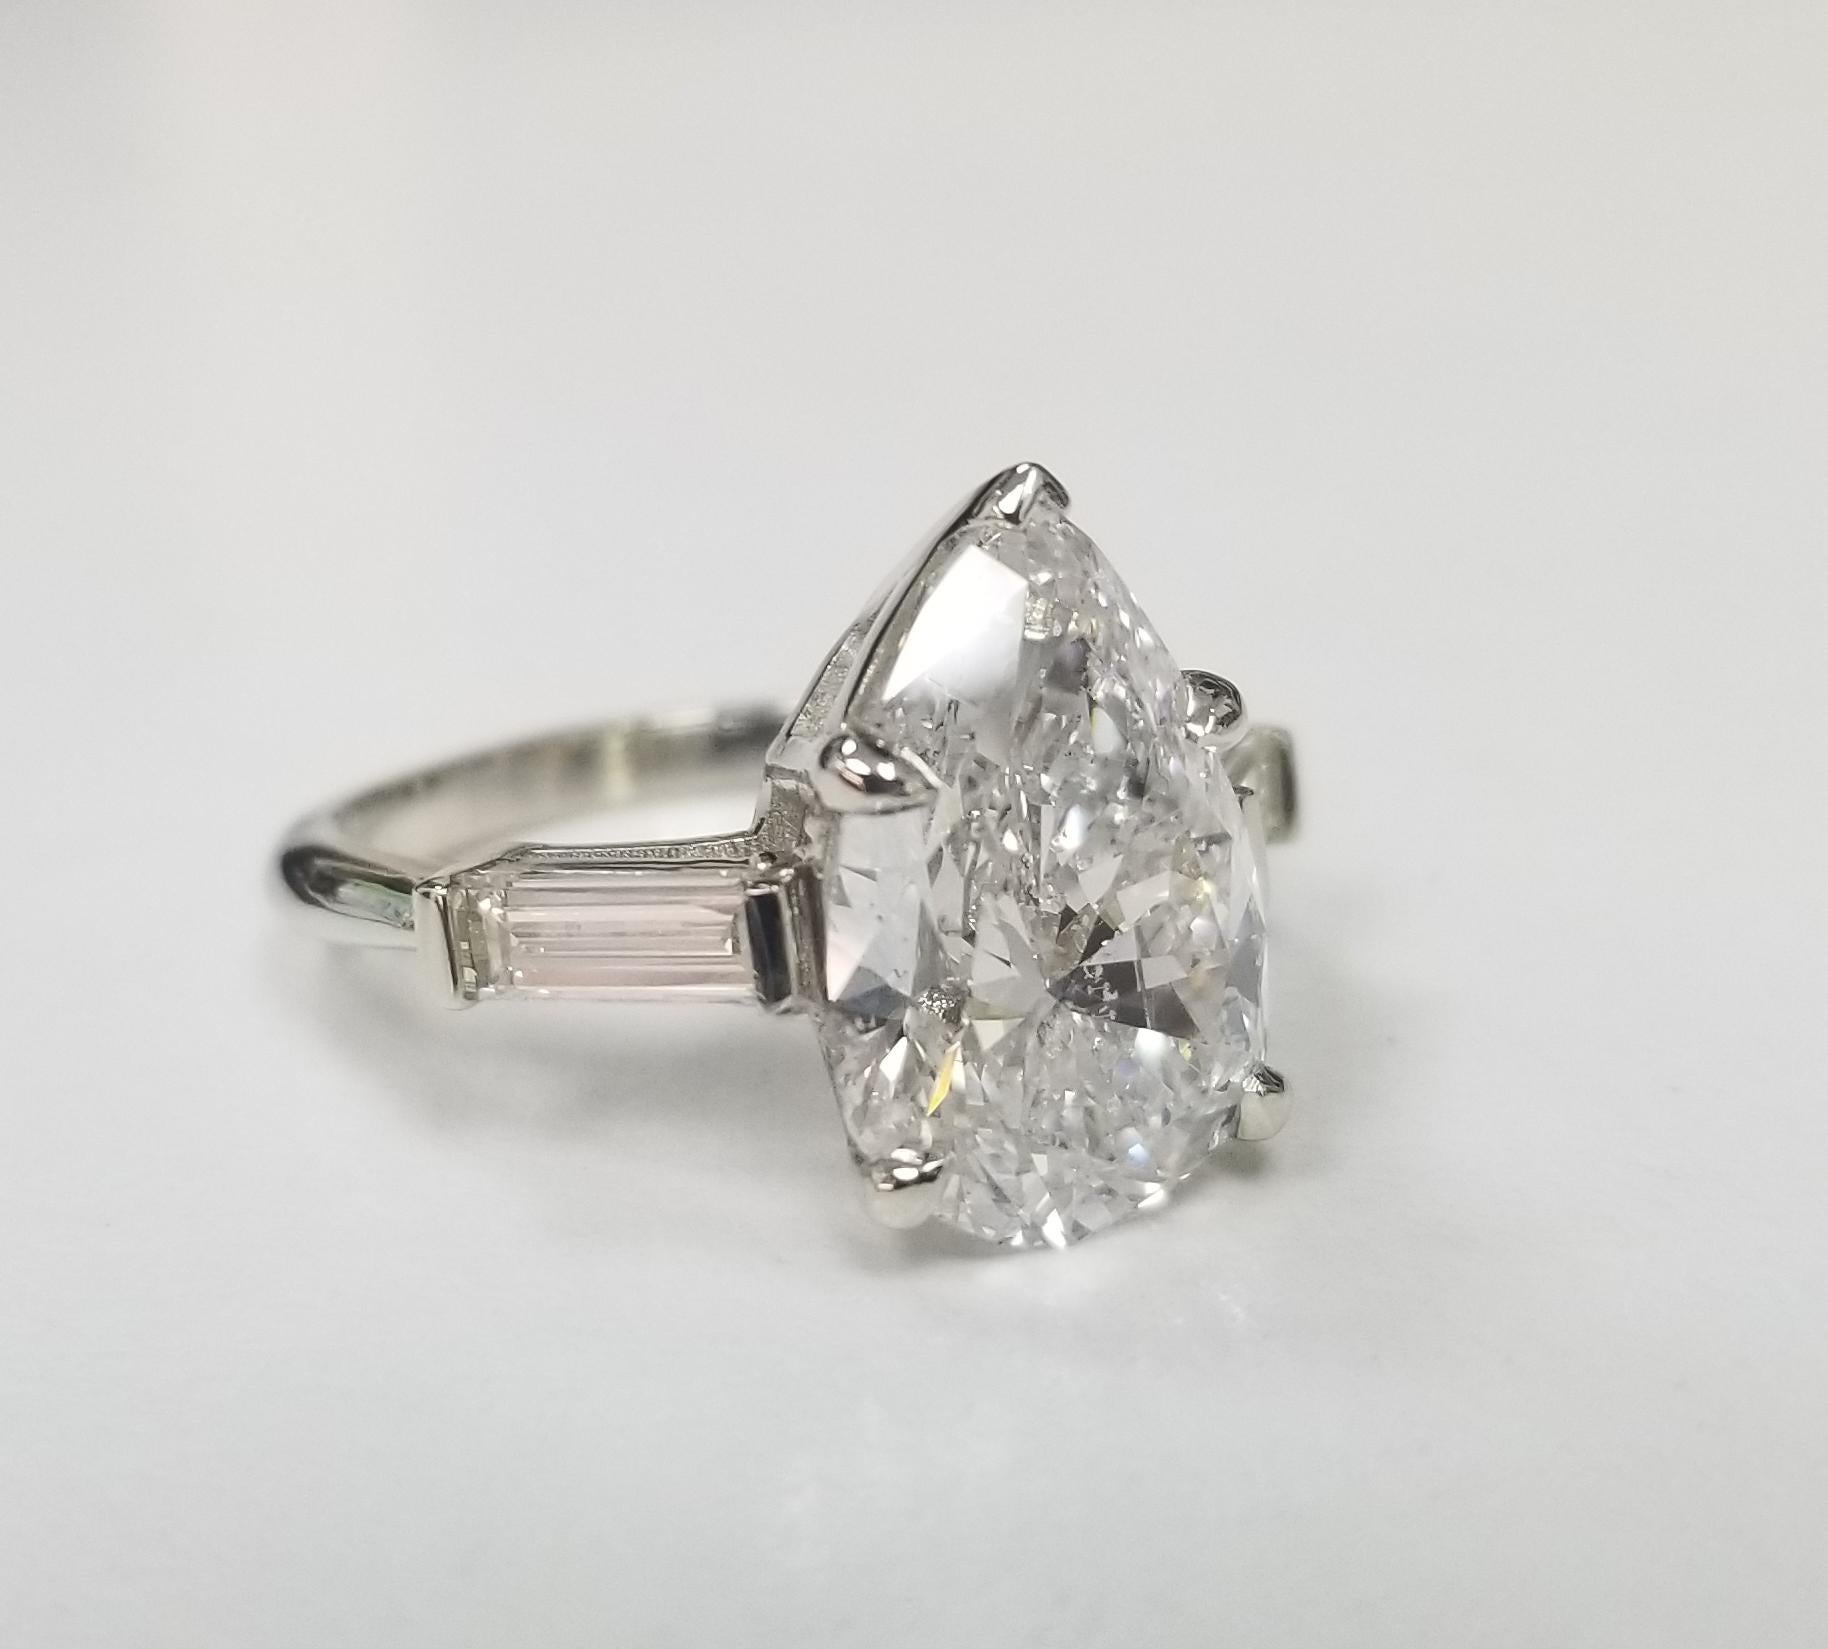 GIA Certified 3.95cts. Pear shape Diamond set in 14k white gold w/ 2 Baguettes weighing .50pts. , containing 1 pear shape diamond; color 